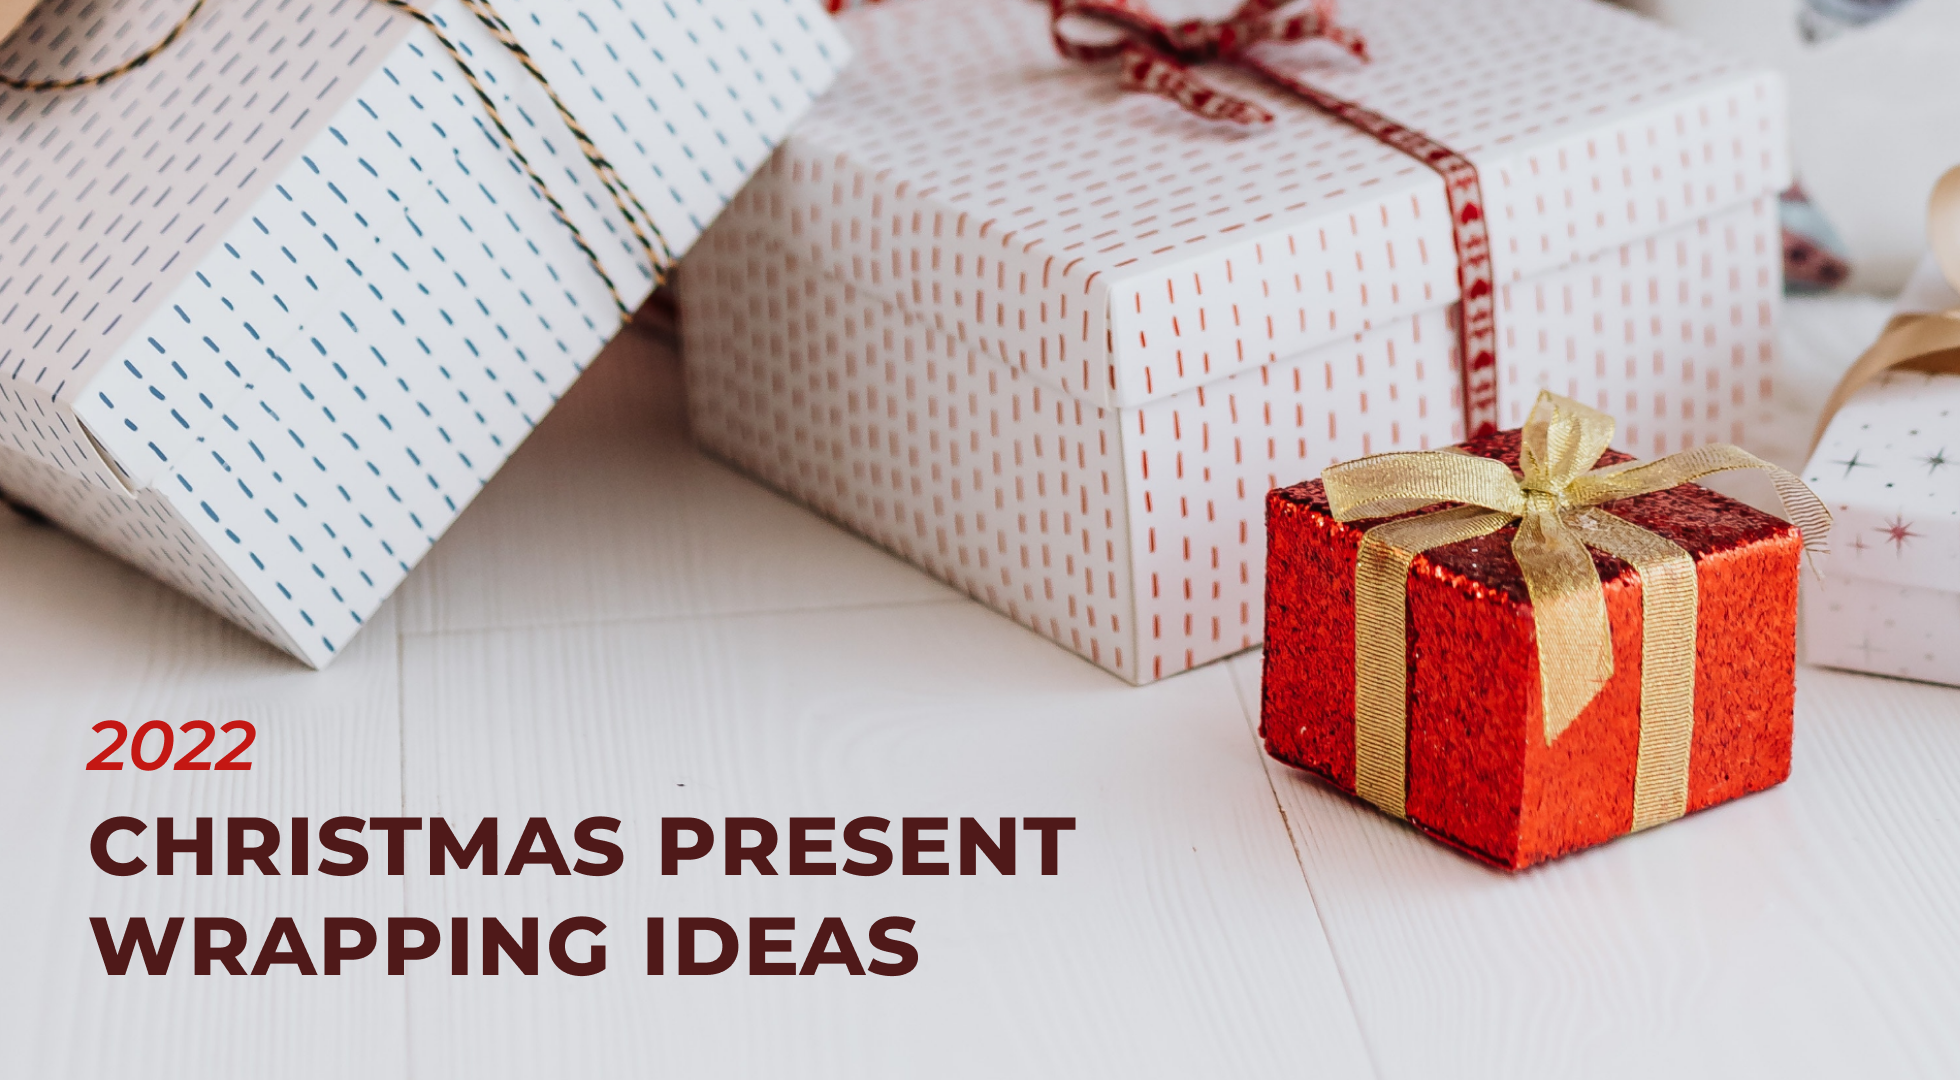 Christmas Present Wrapping Ideas in 2022